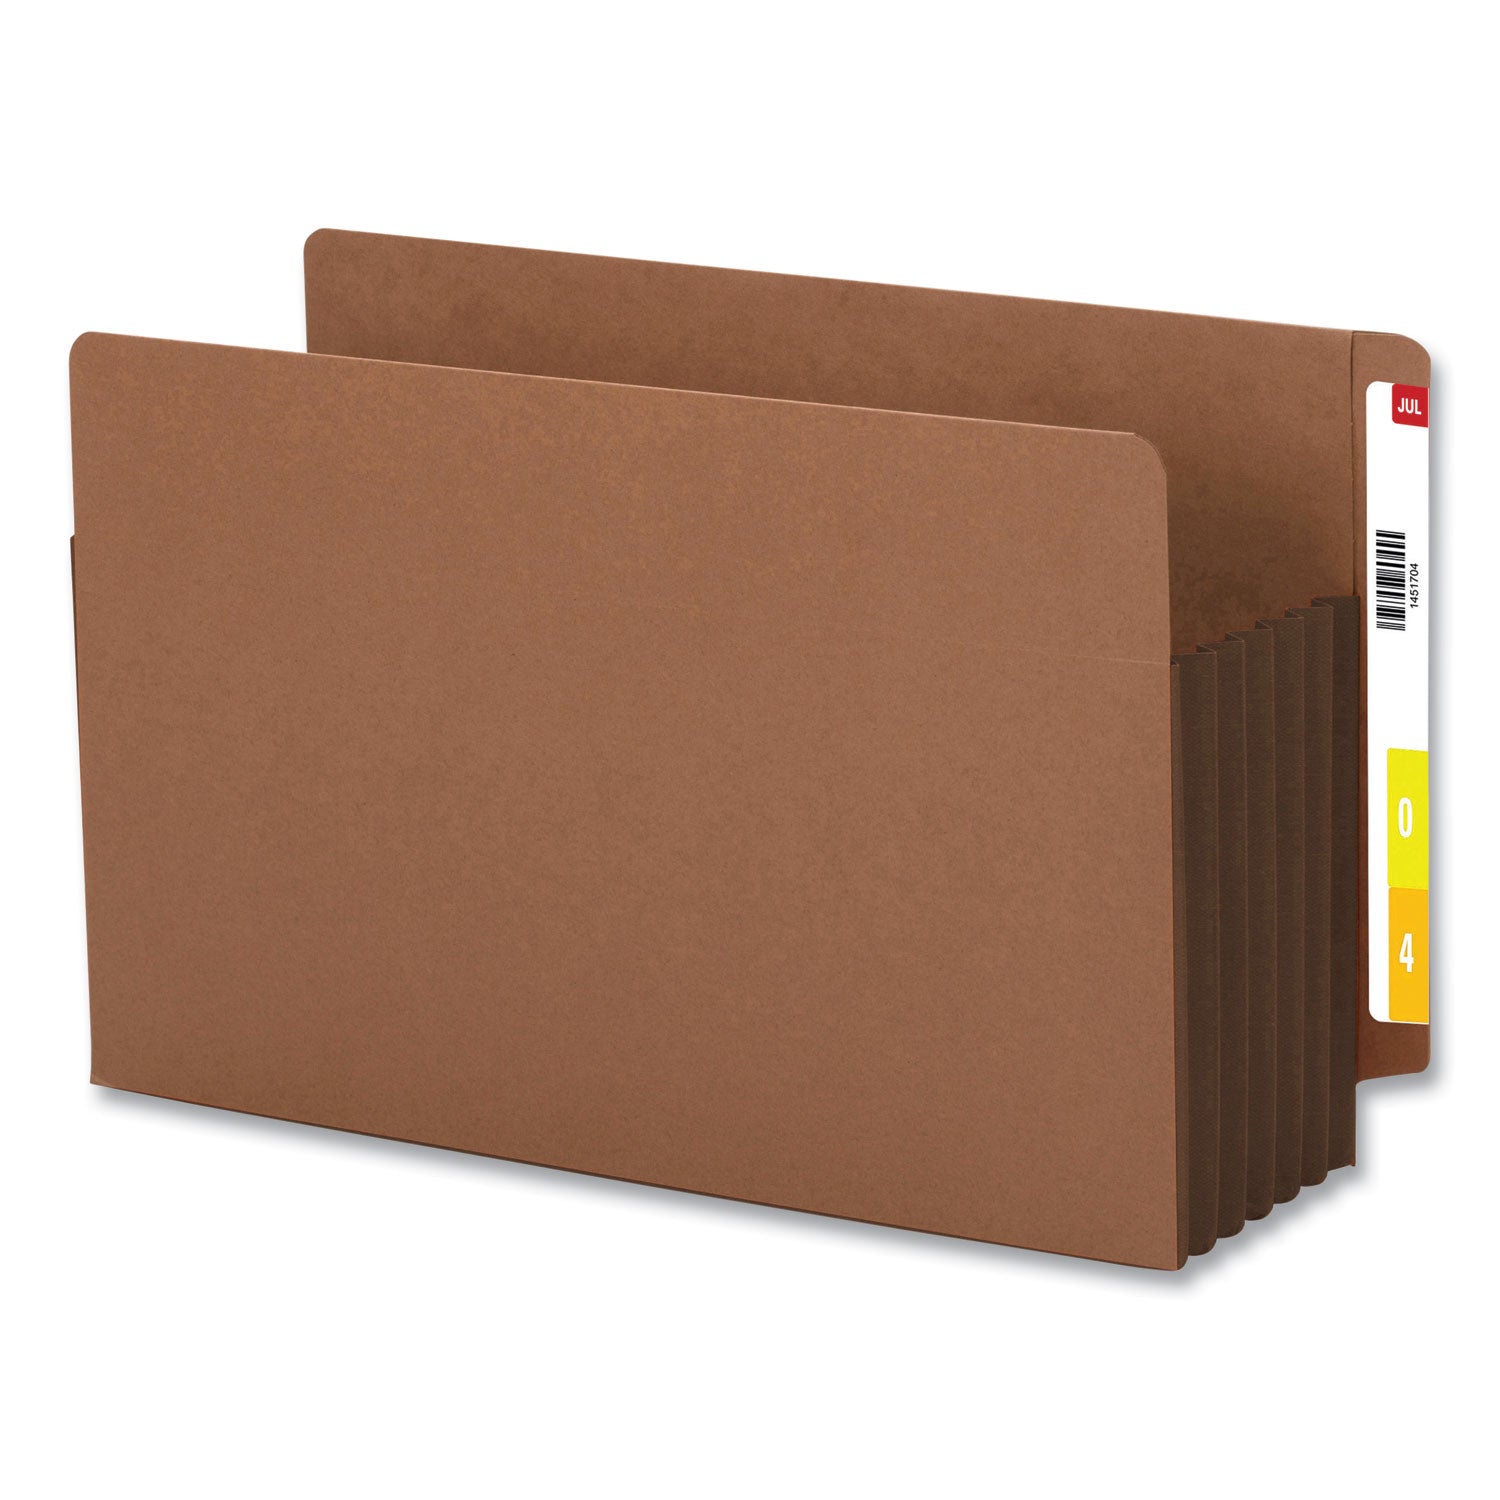 Redrope Drop-Front End Tab File Pockets, Fully Lined 6.5" High Gussets, 5.25" Expansion, Legal Size, Redrope/Brown, 10/Box - 